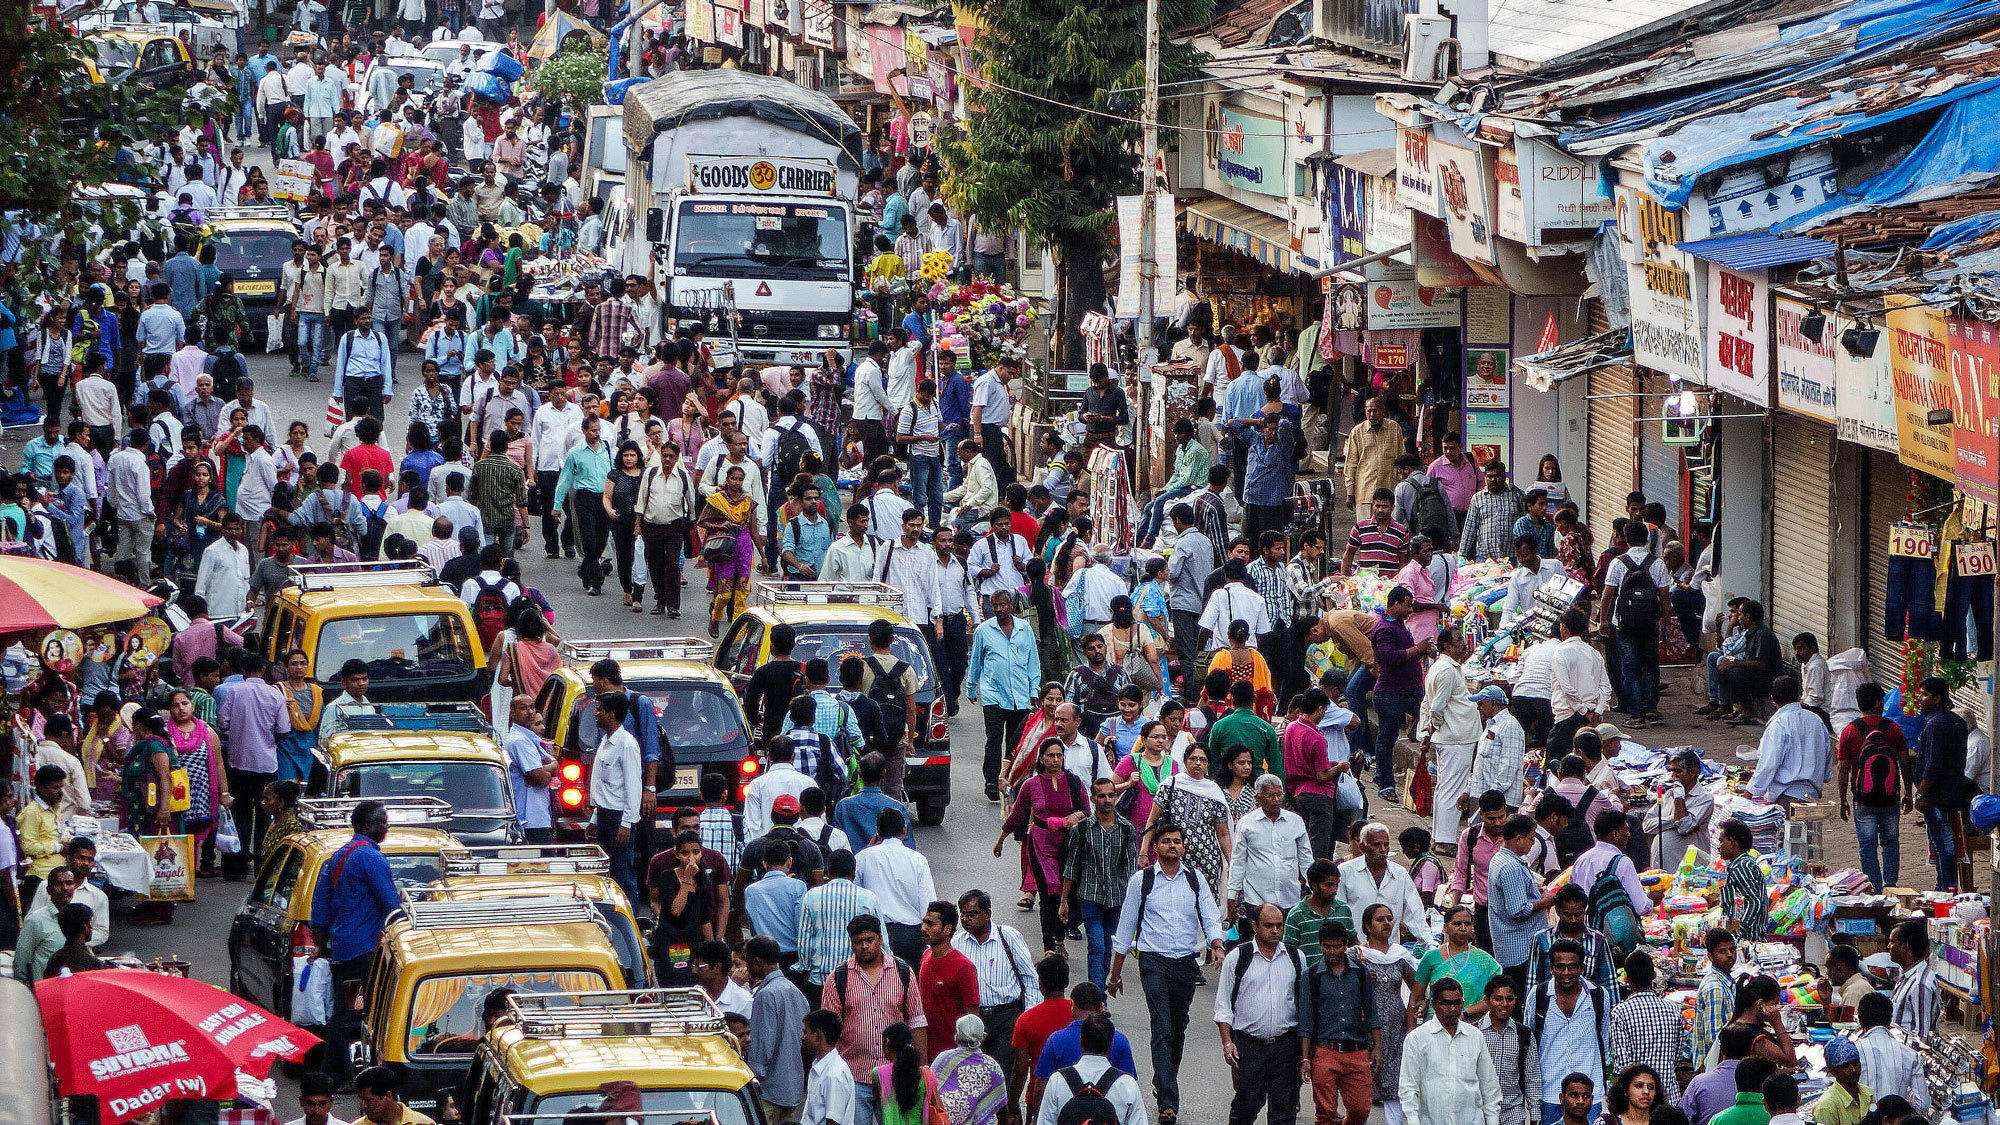 UN projected India’s urban population to be 675 million in 2035